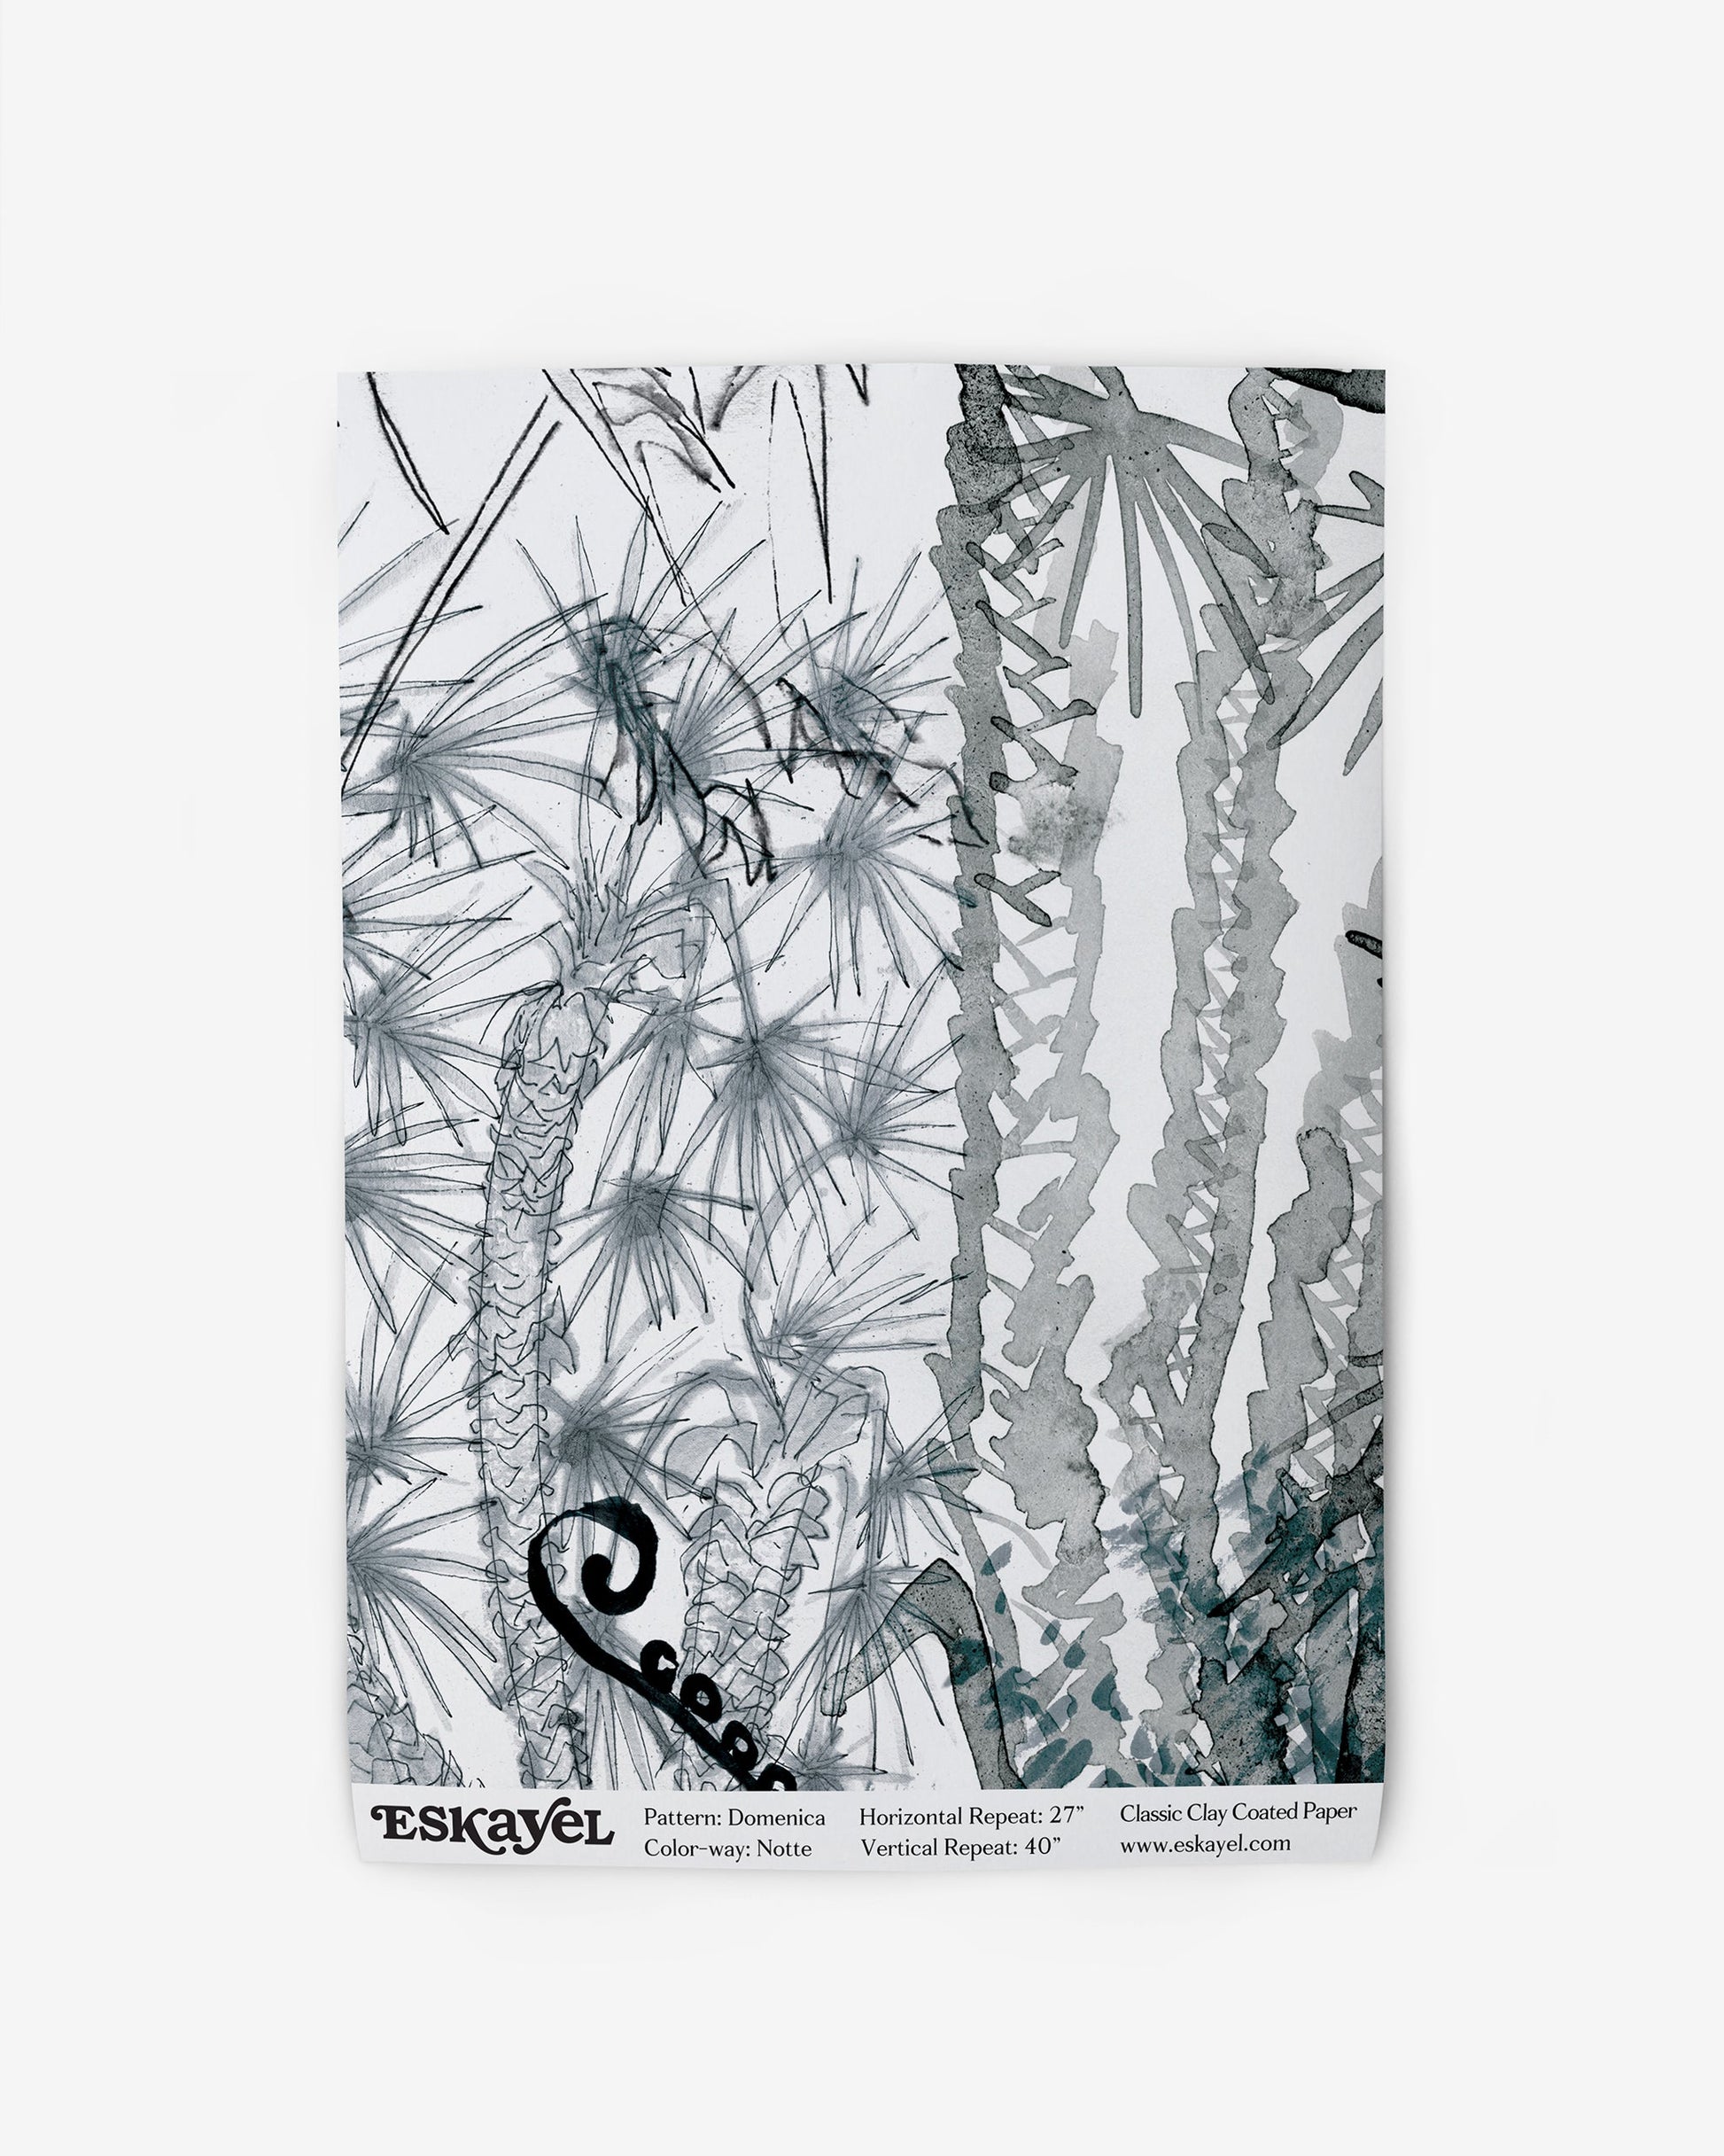 A luxurious black and white drawing of plants from the Salentu Collection, featuring the Domenica Wallpaper Notte pattern